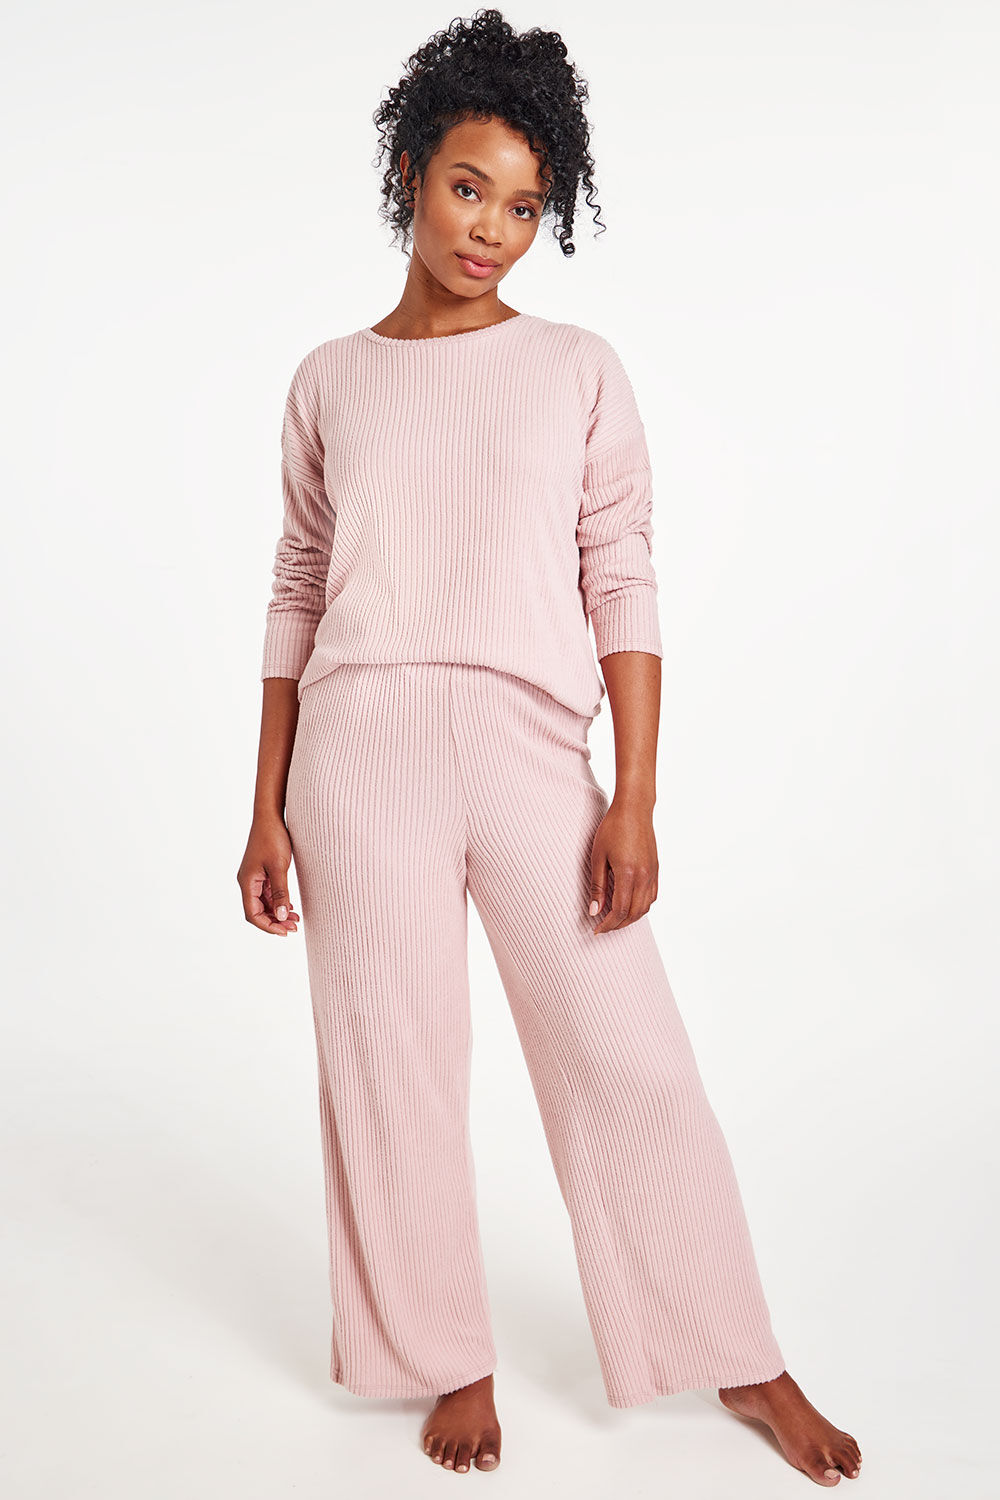 Bonmarche Pink Long Sleeve Ribbed Pyjama Set With Tie Waist Eyelet Detail, Size: 16-18